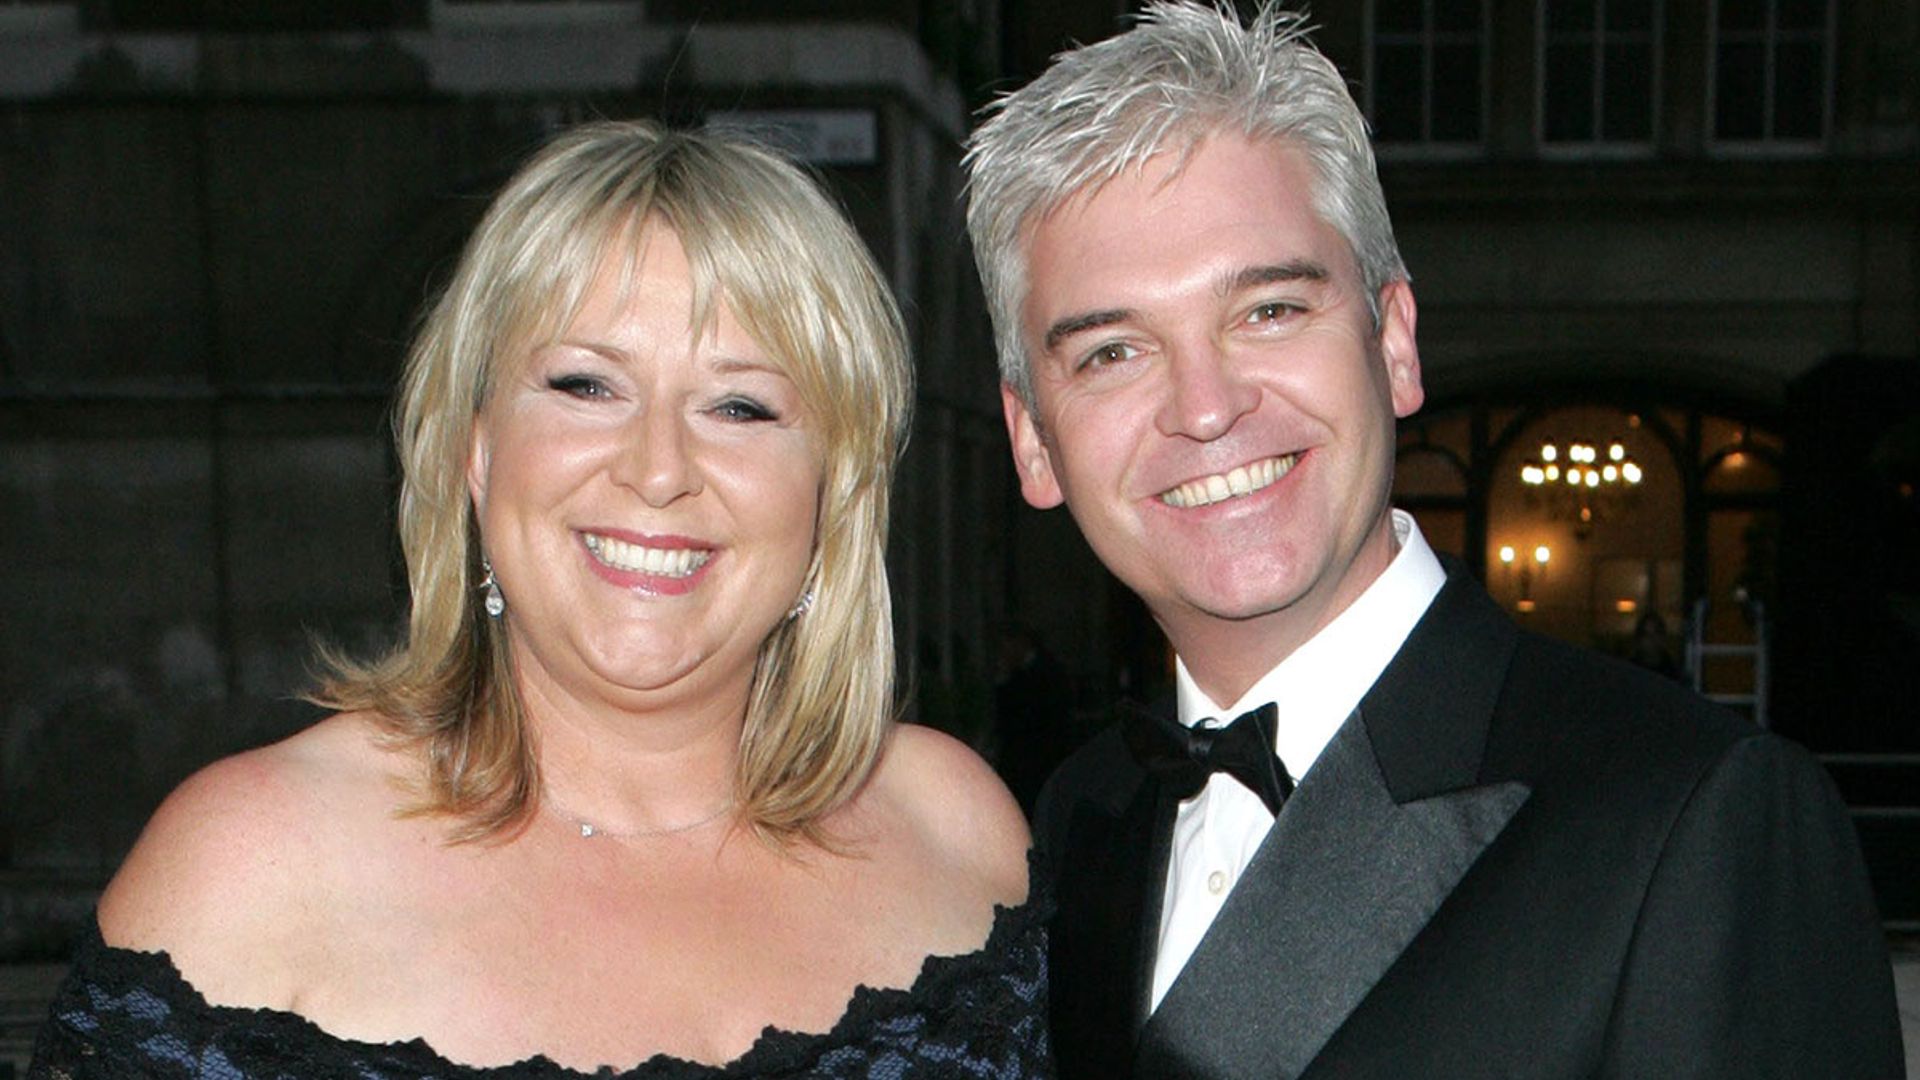 Fern Britton applauds Phillip Schofield for coming out as gay: 'My heart goes out to his family'